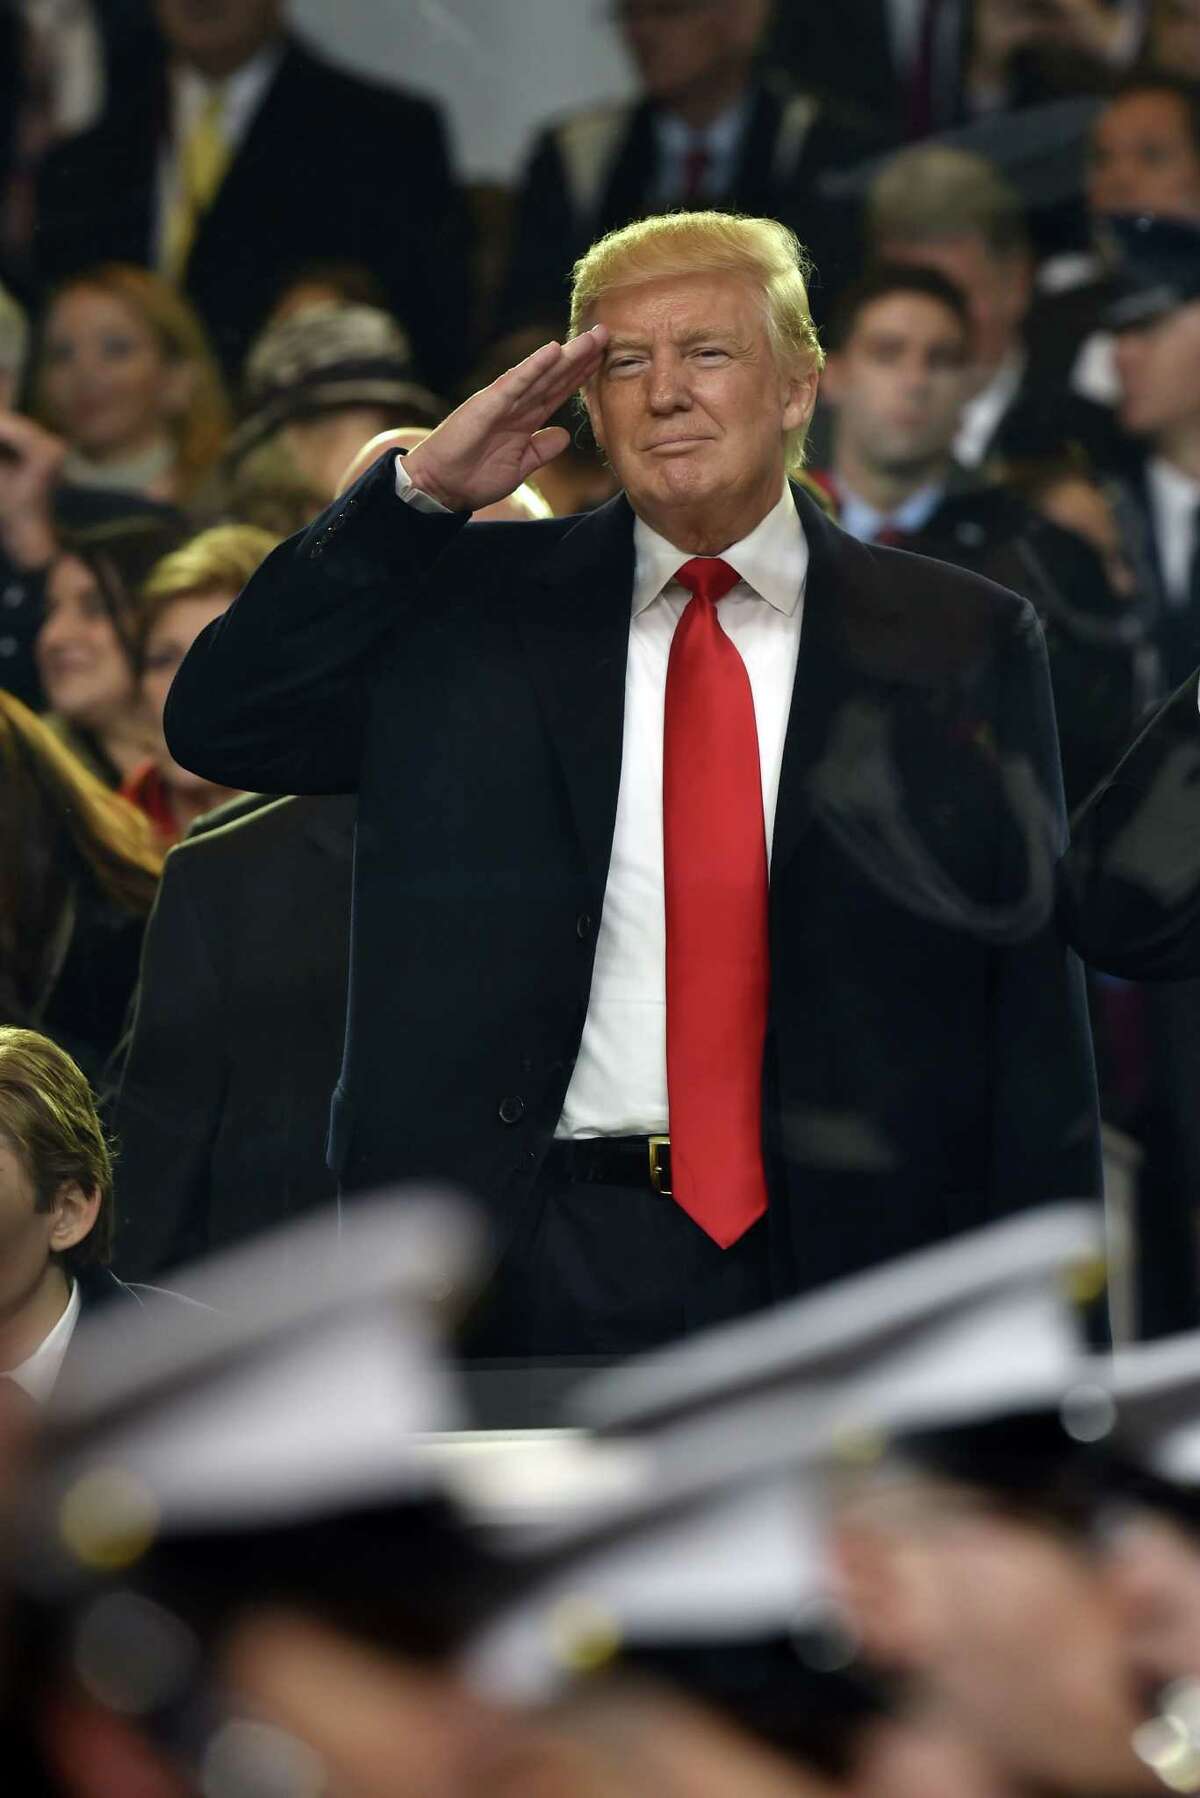 President Donald Trump salutes during the presidential inaugural parade on Jan. 20, 2017 in Washington, D.C. (Nicholas Kamm/ AFP/Getty Images